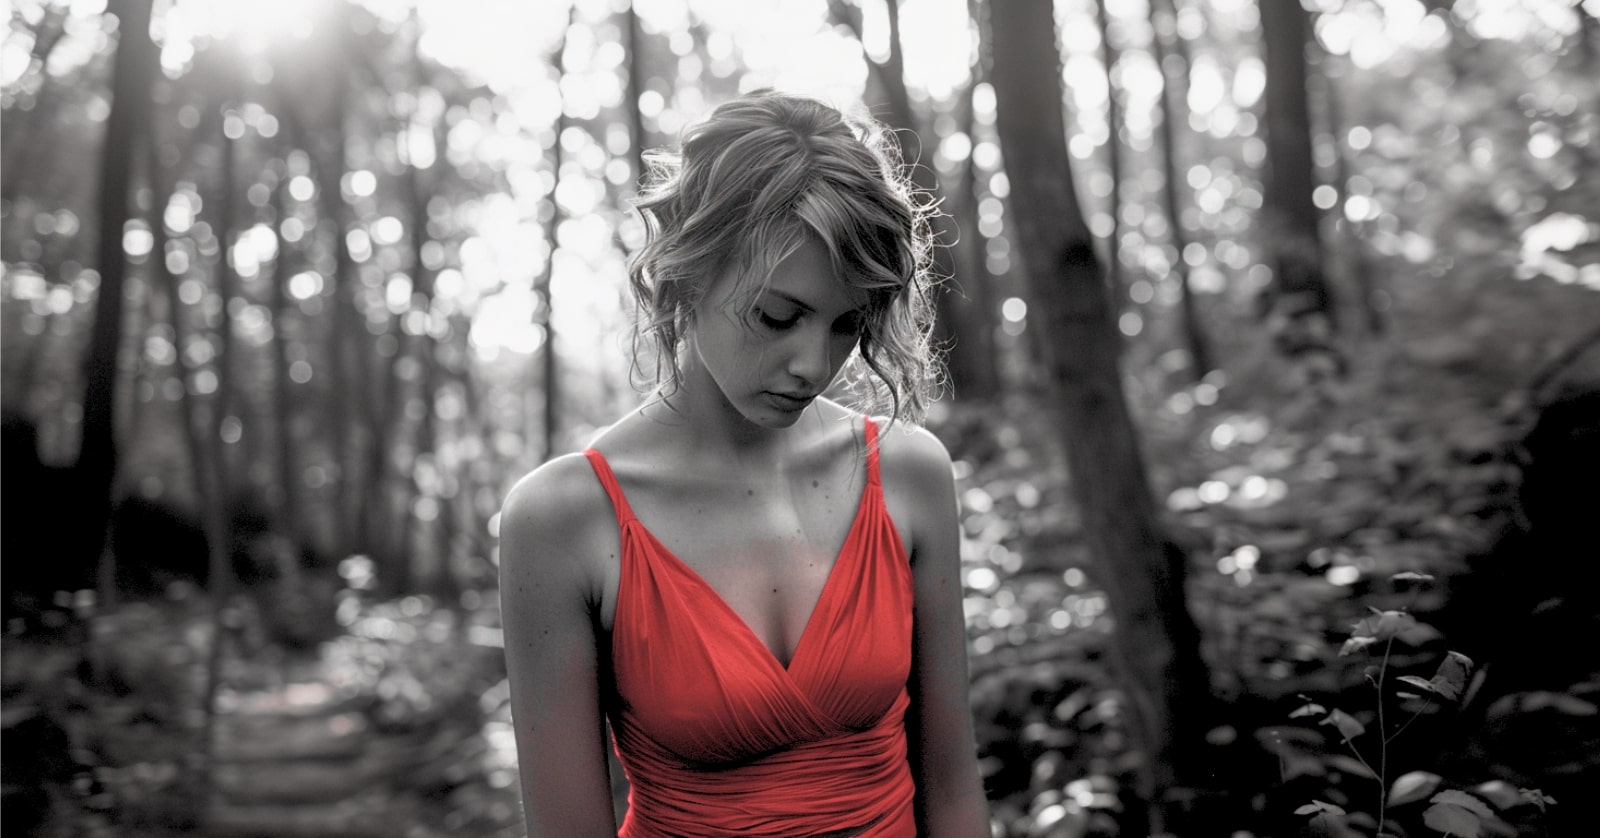 black and white photo of a sad woman standing in a forest wearing a red dress